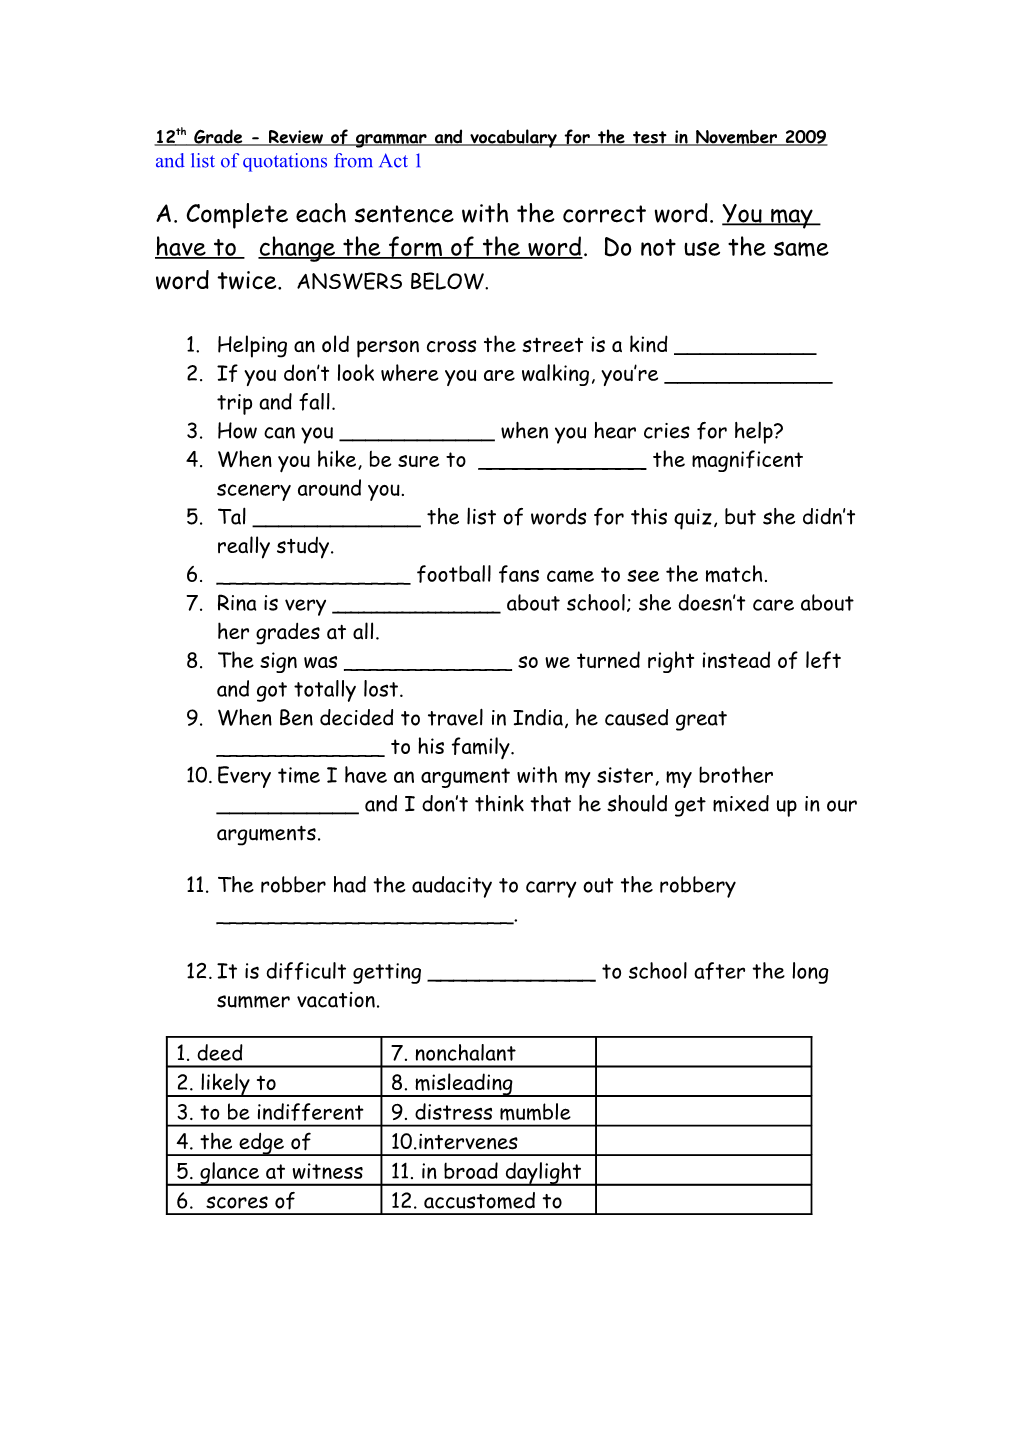 12Th Grade - Review of Grammar and Vocabulary for the Test in November 2009